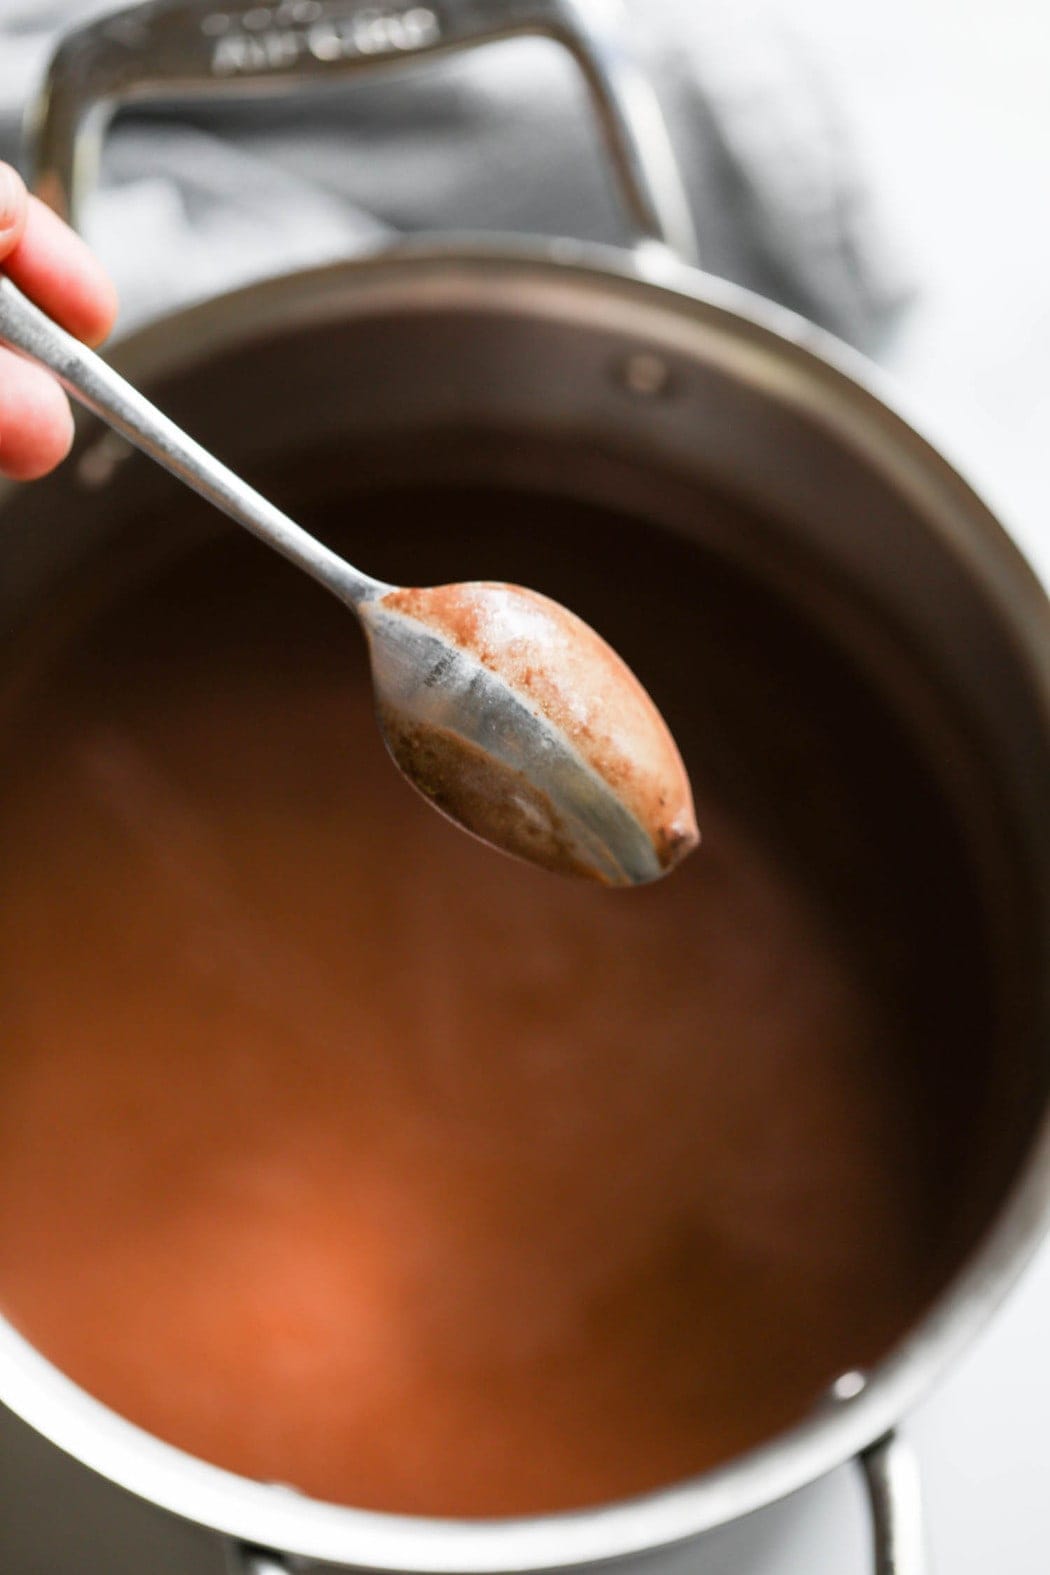 Fudgesicle mixture being stirred in a saucepan